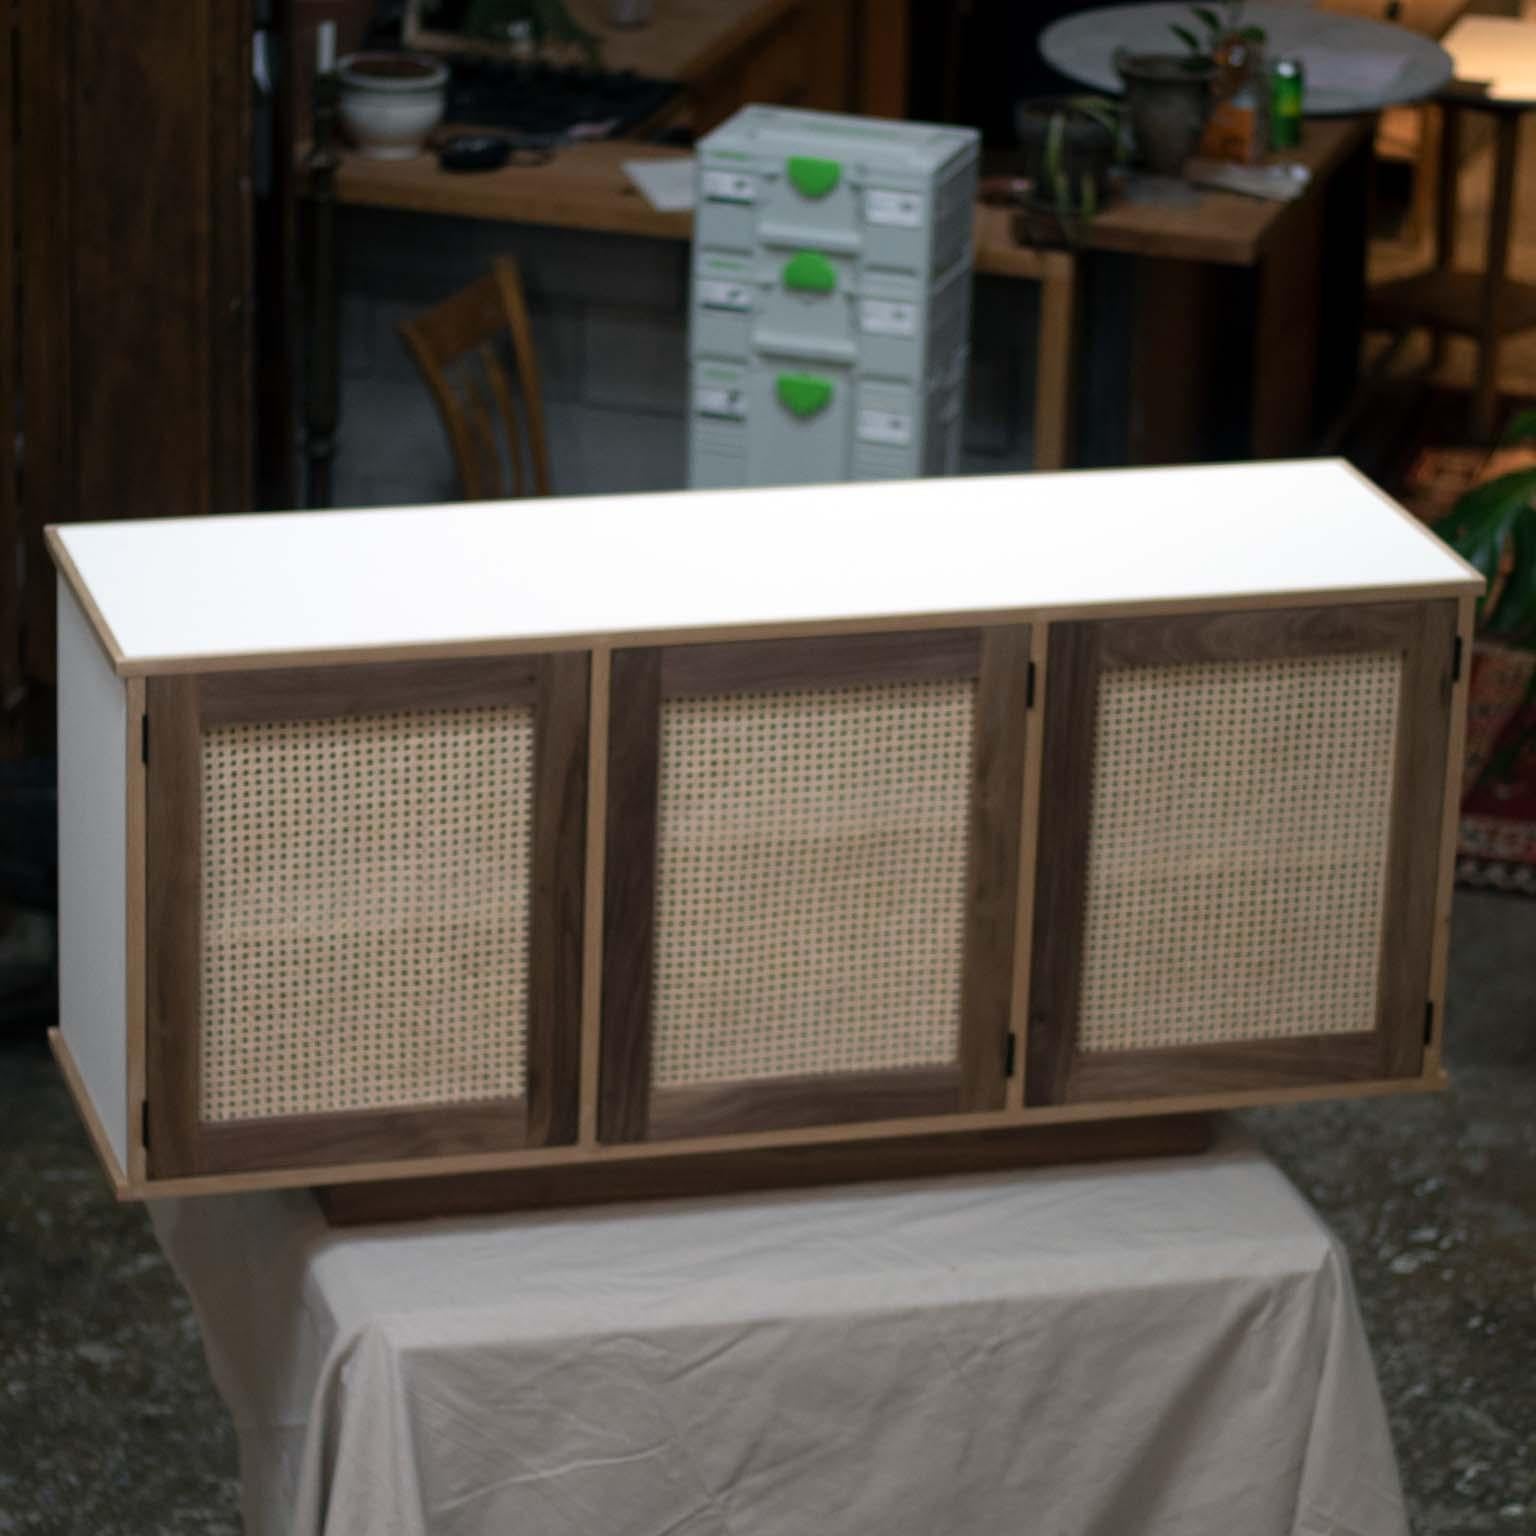 The Updike cabinet is perfect for someone looking for a modern piece of furniture with some vintage style.

The rattan doors allow this cabinet to be perfect for storing electronics that require a remote. 
Customers can specify dimensions, paint